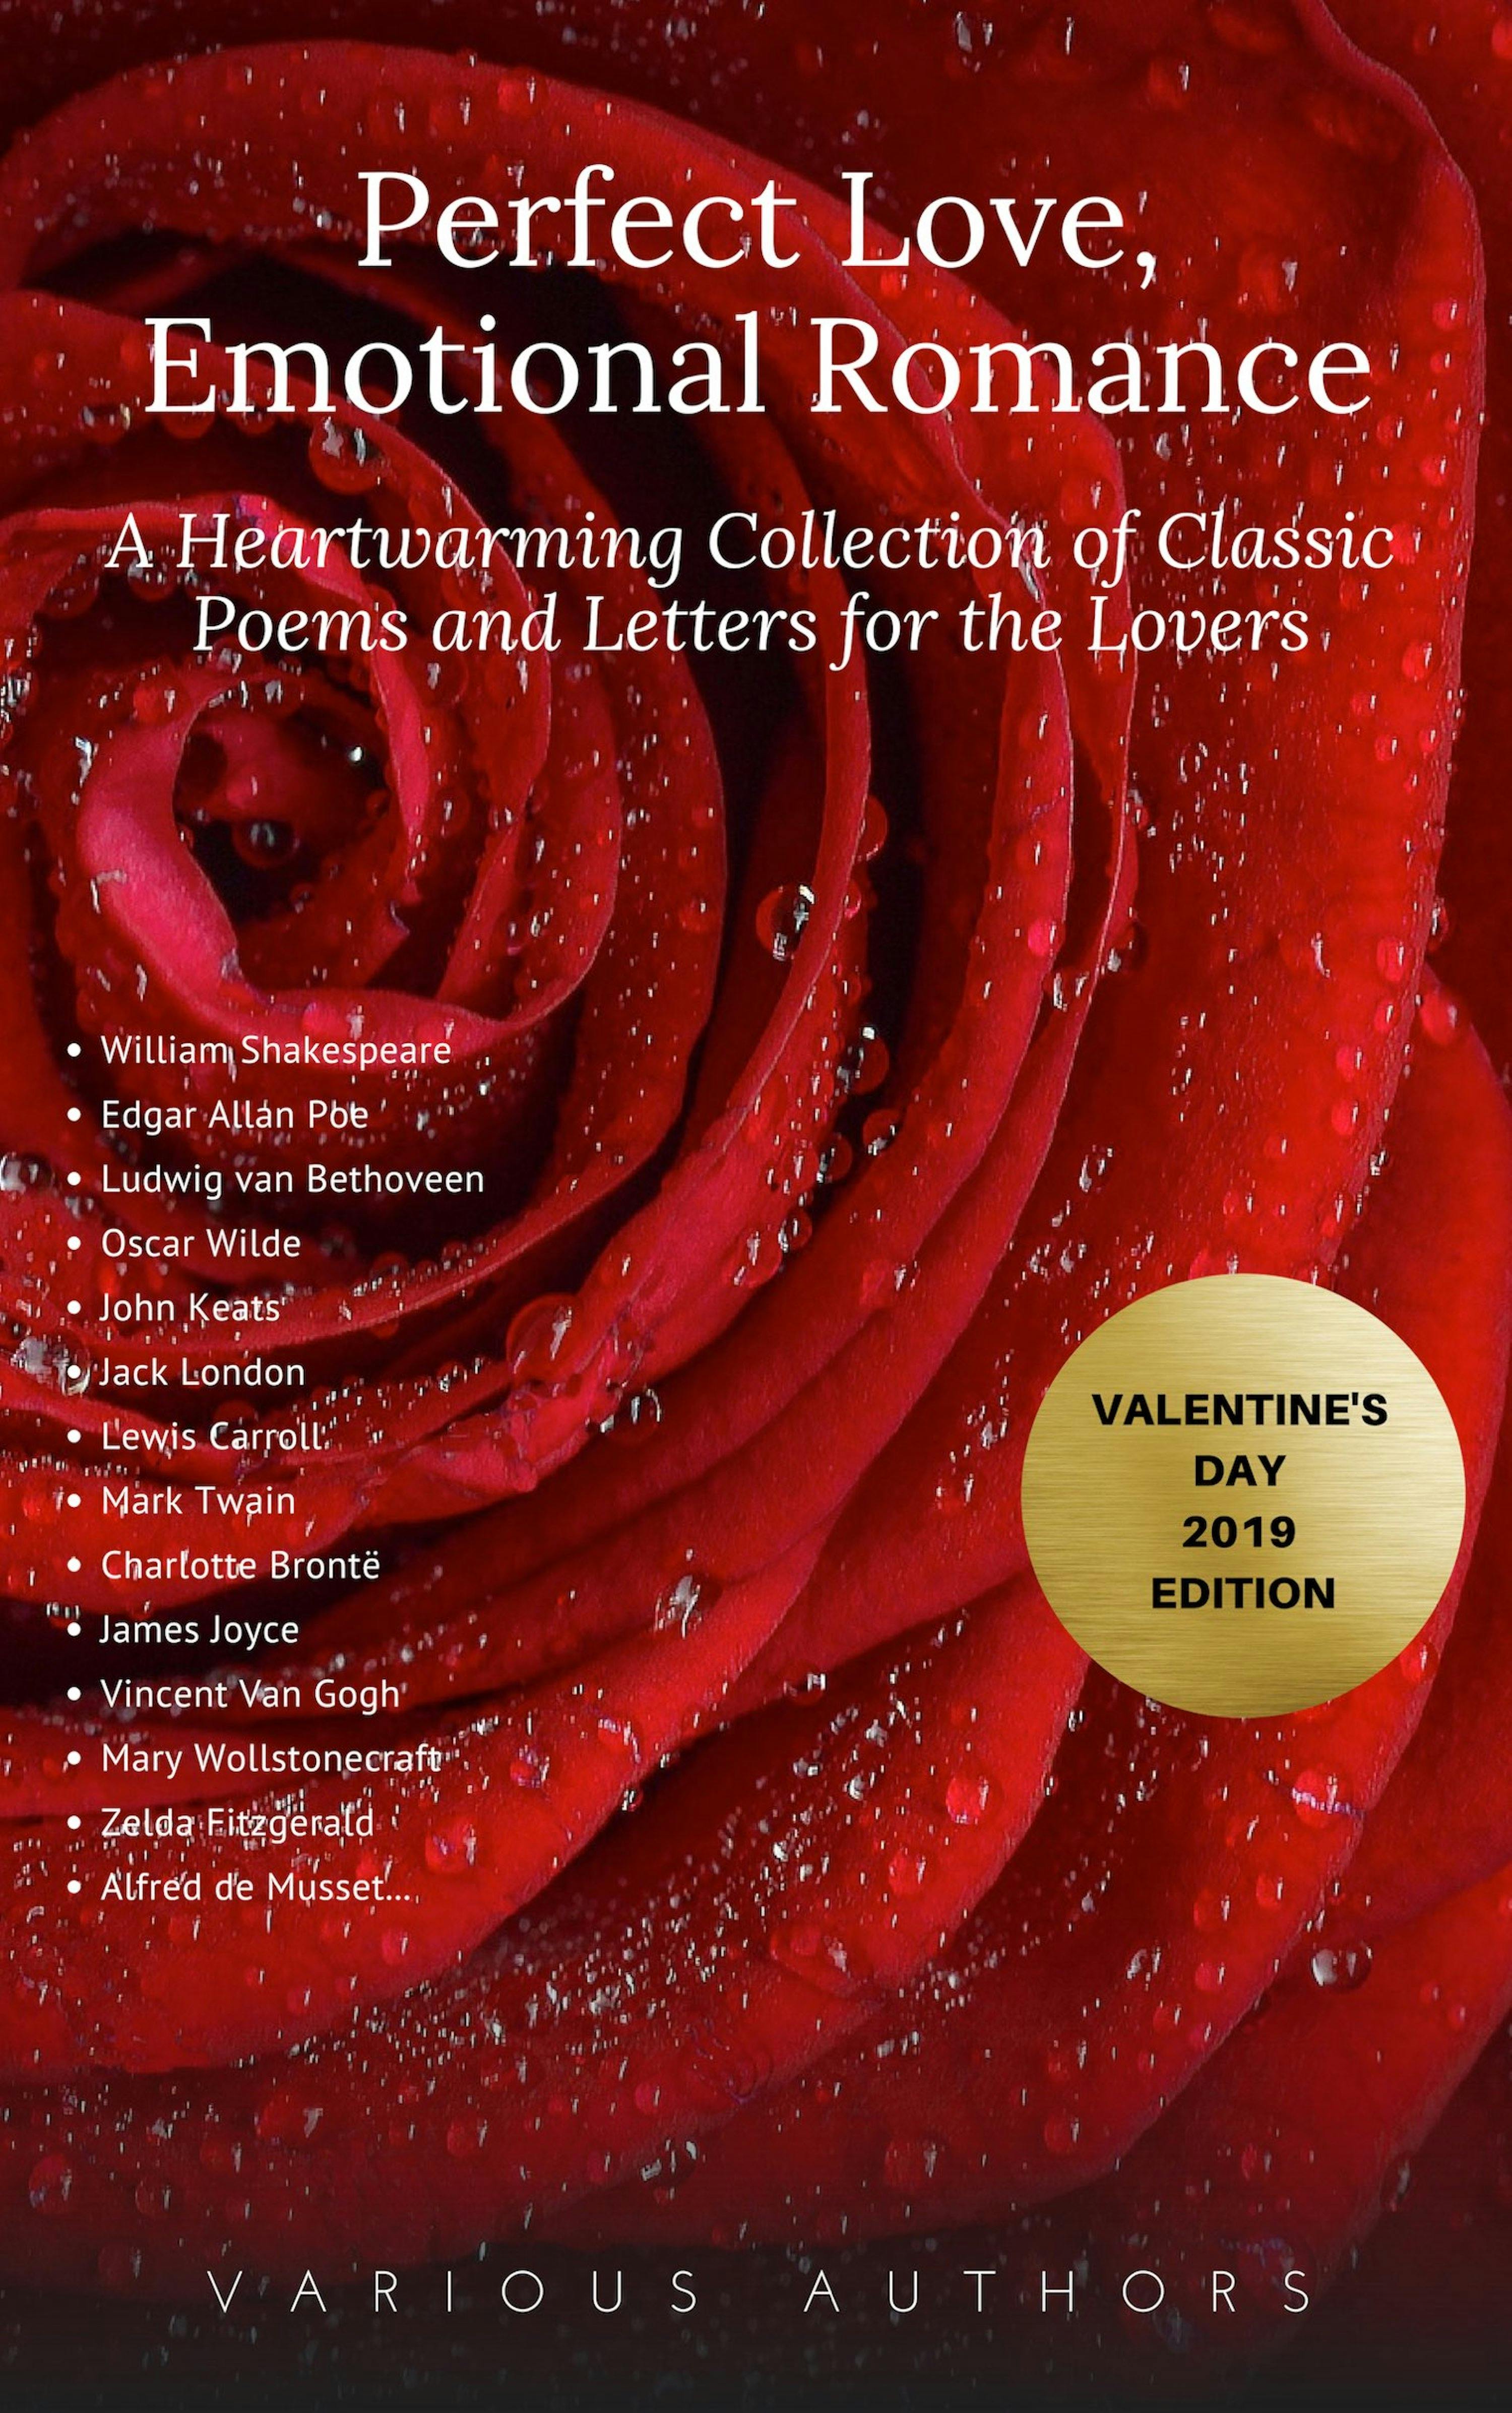 Perfect Love, Emotional Romance: A Heartwarming Collection of 100 Classic Poems and Letters for the Lovers (Valentine's Day 2019 Edition) - undefined